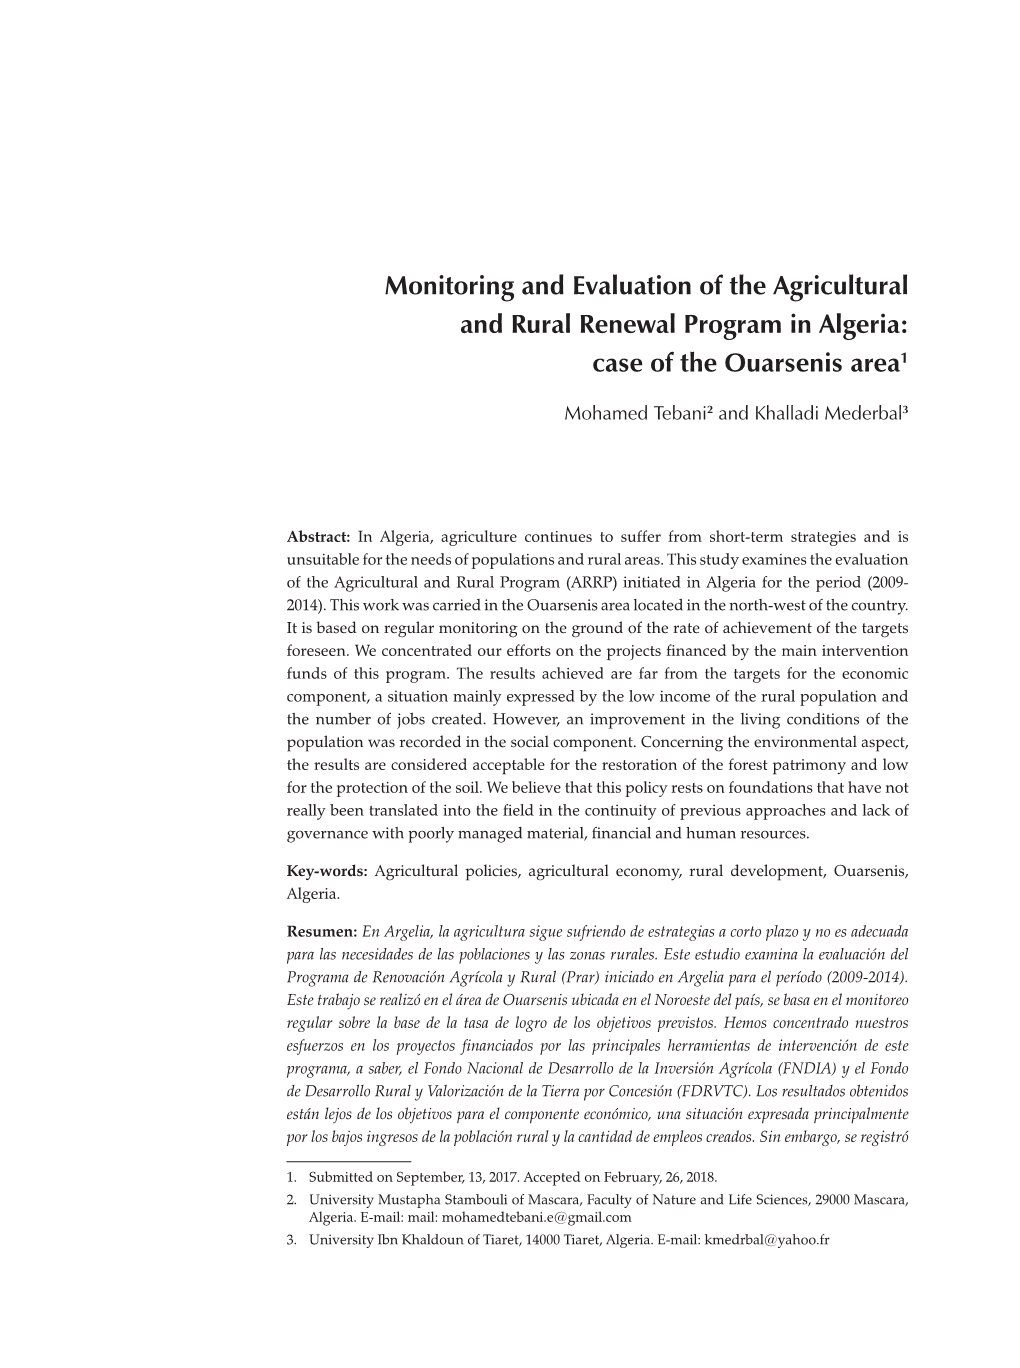 Monitoring and Evaluation of the Agricultural and Rural Renewal Program in Algeria: Case of the Ouarsenis Area1